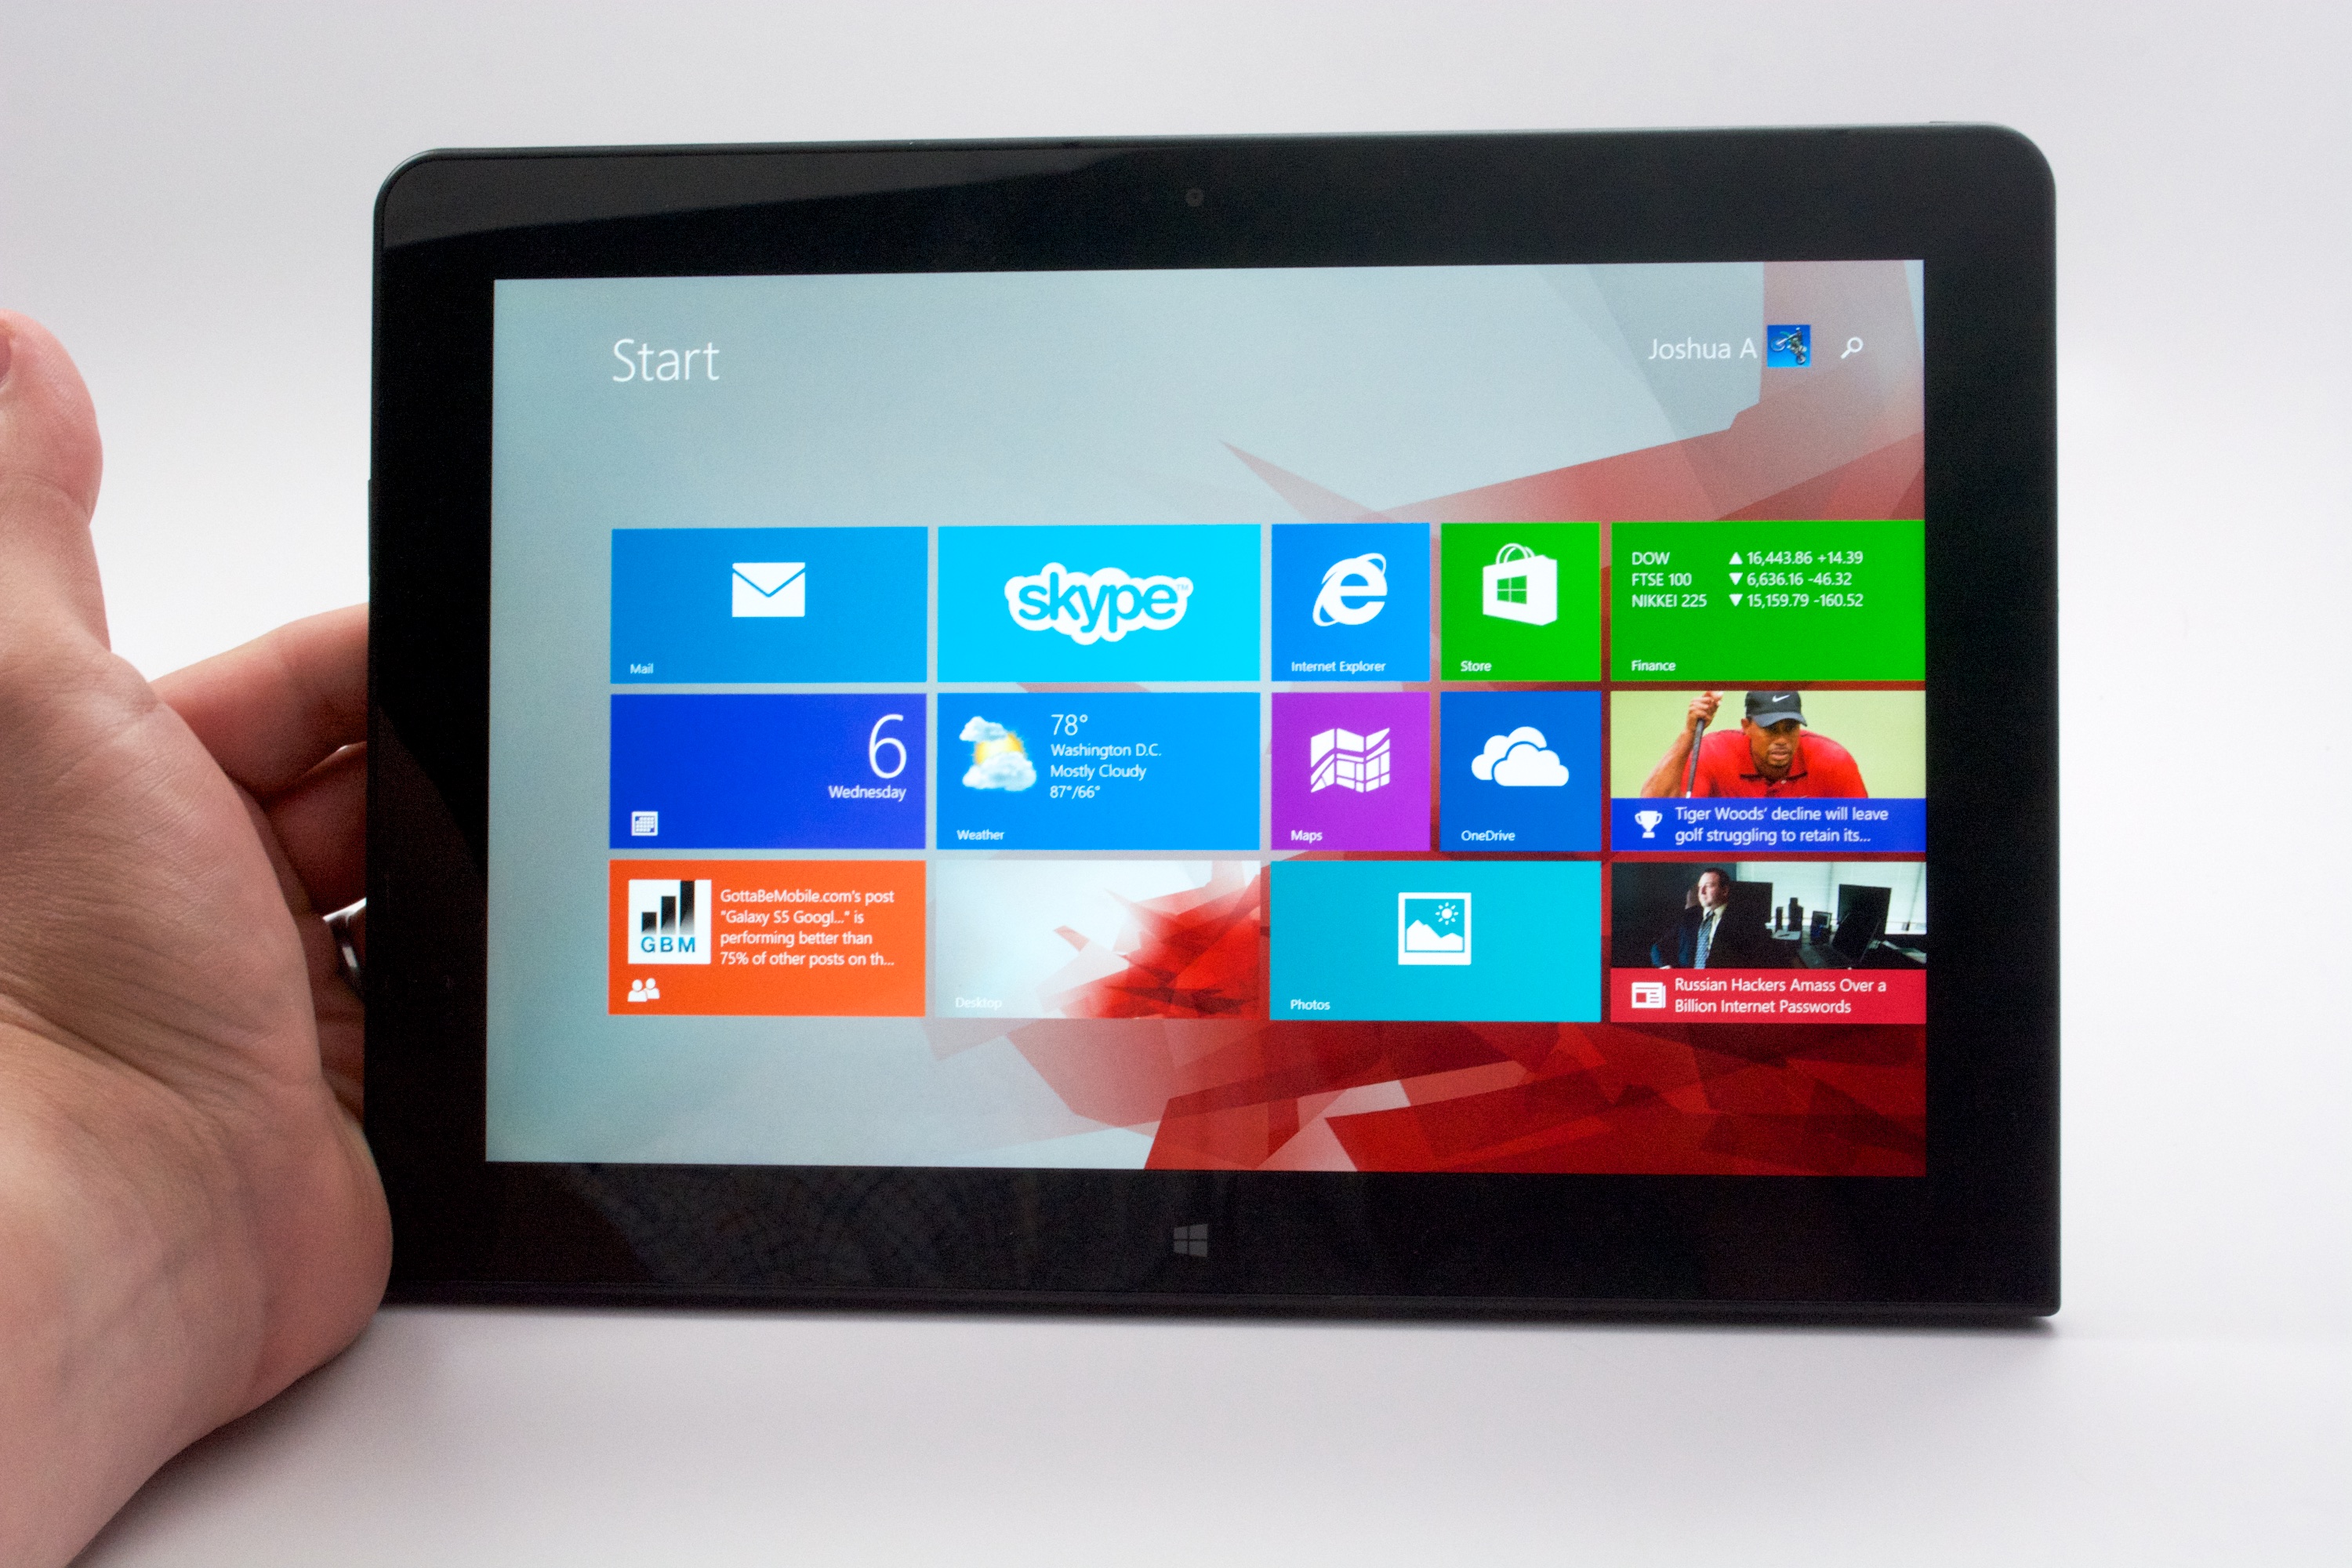 The ThinkPad 10 is a business friendly Windows 8 tablet that delivers productivity with optional accessories.